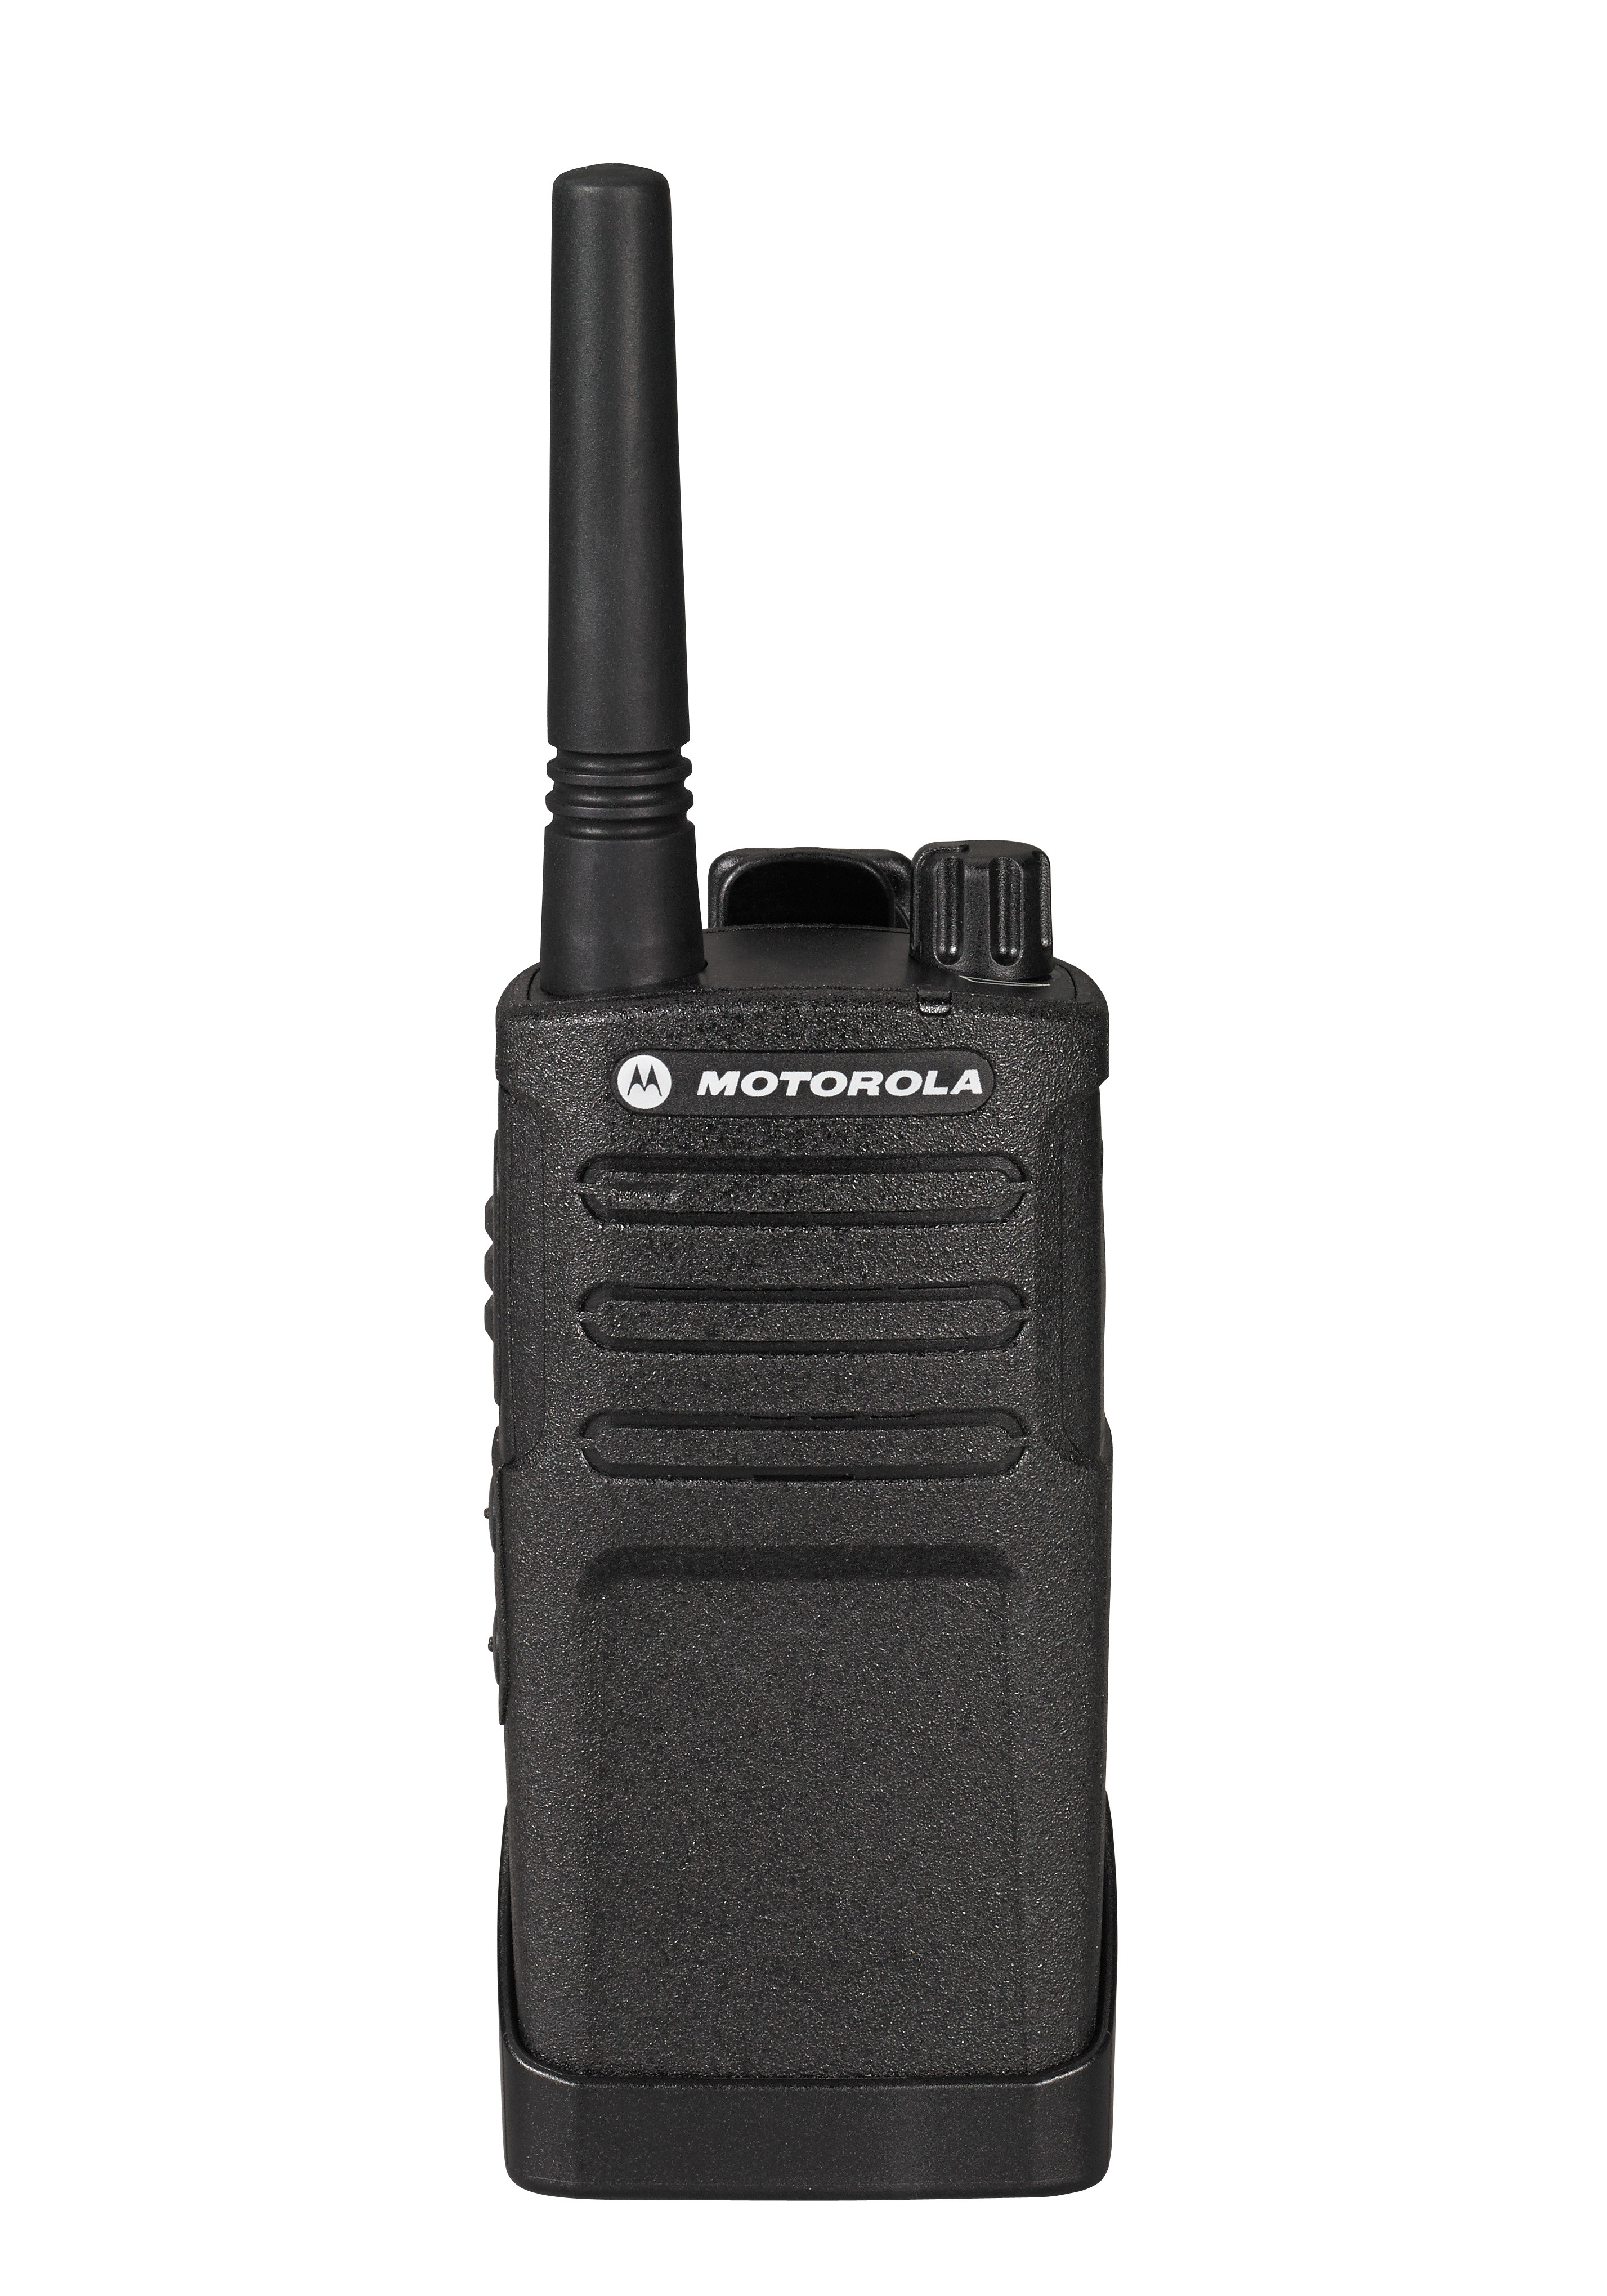 The Motorola RMM2050 radio features a channel announcement with voice alias, audible call tones, channel scan, hands-free VOX mode (with optional accessories), voice scrambling and more.